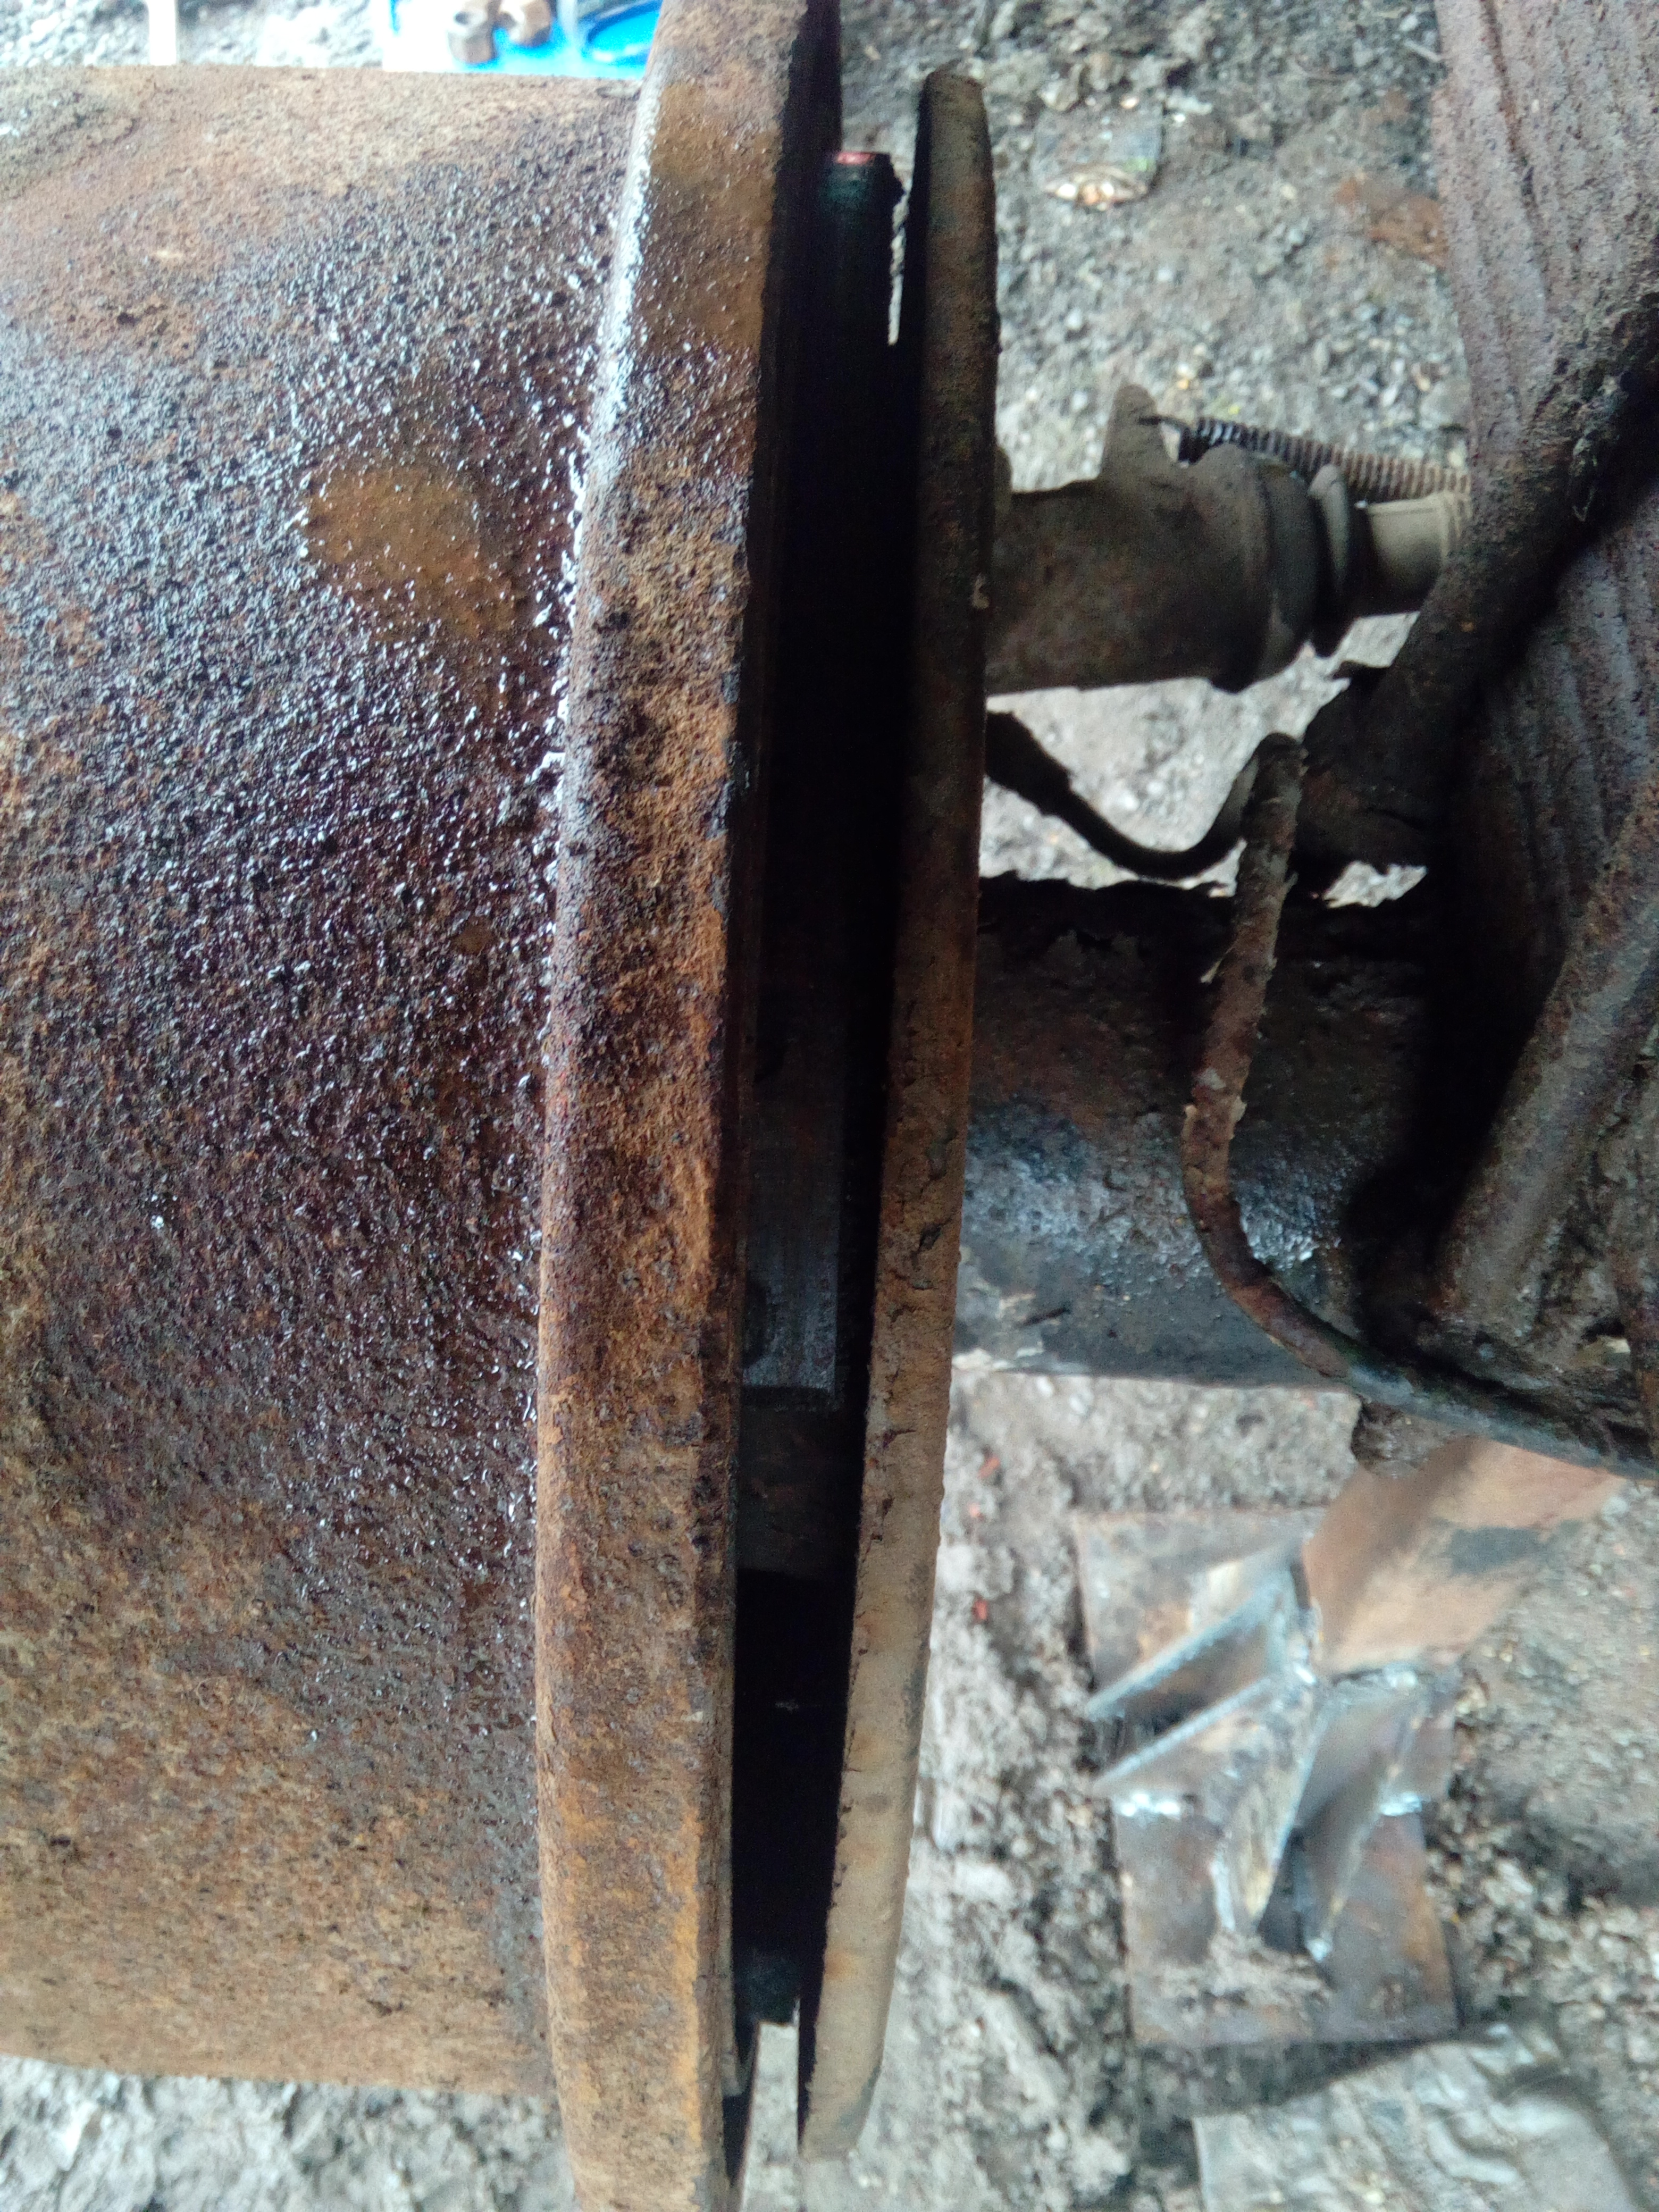 A photograph showing the brake drum having come partially off its
mountings, leaving a 20mm gap visible between the edge of the drum and
the backplate